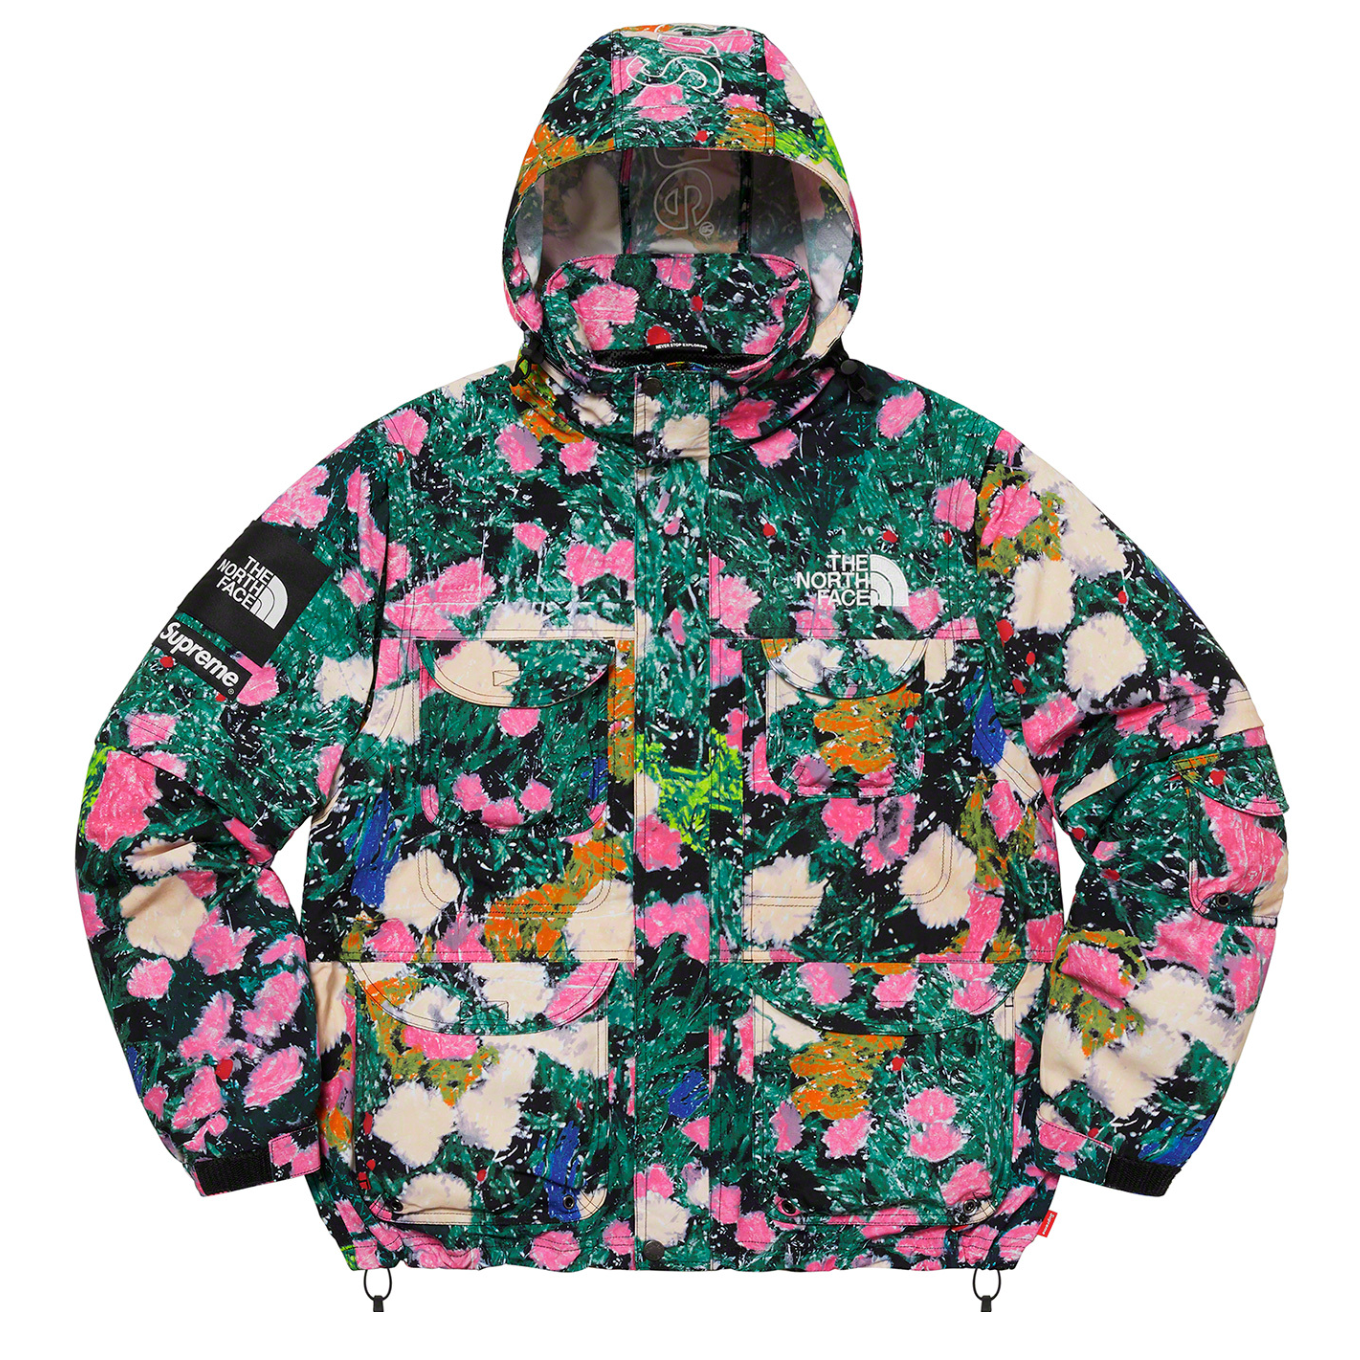 Supreme x The North Face - Flowers Print Trekking Convertible Jacket